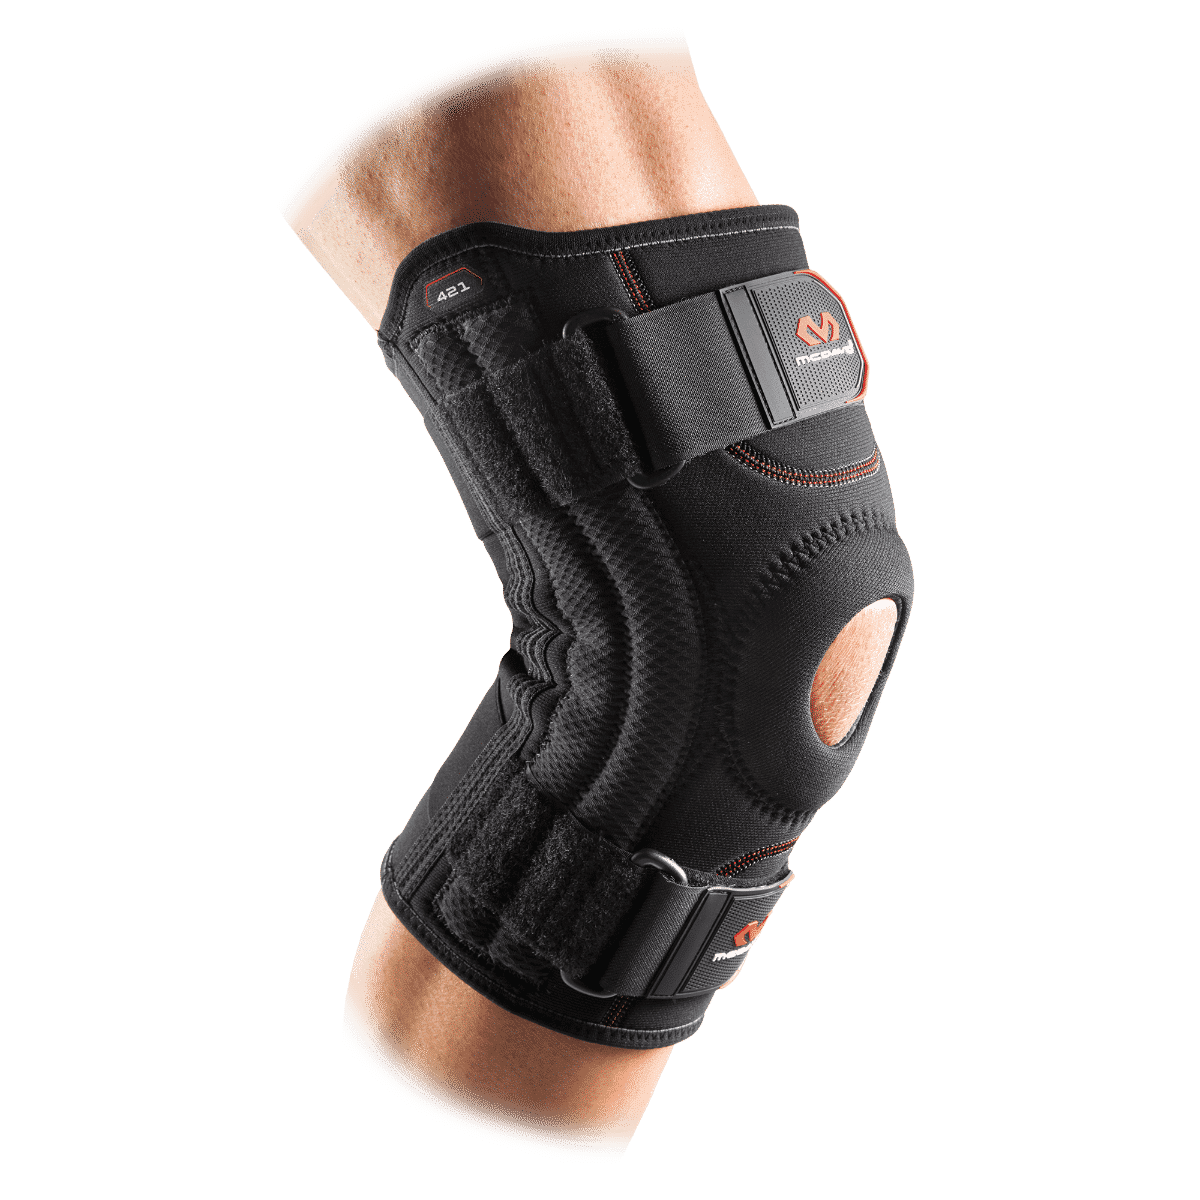 McDavid Knee Support Brace With Stays 421